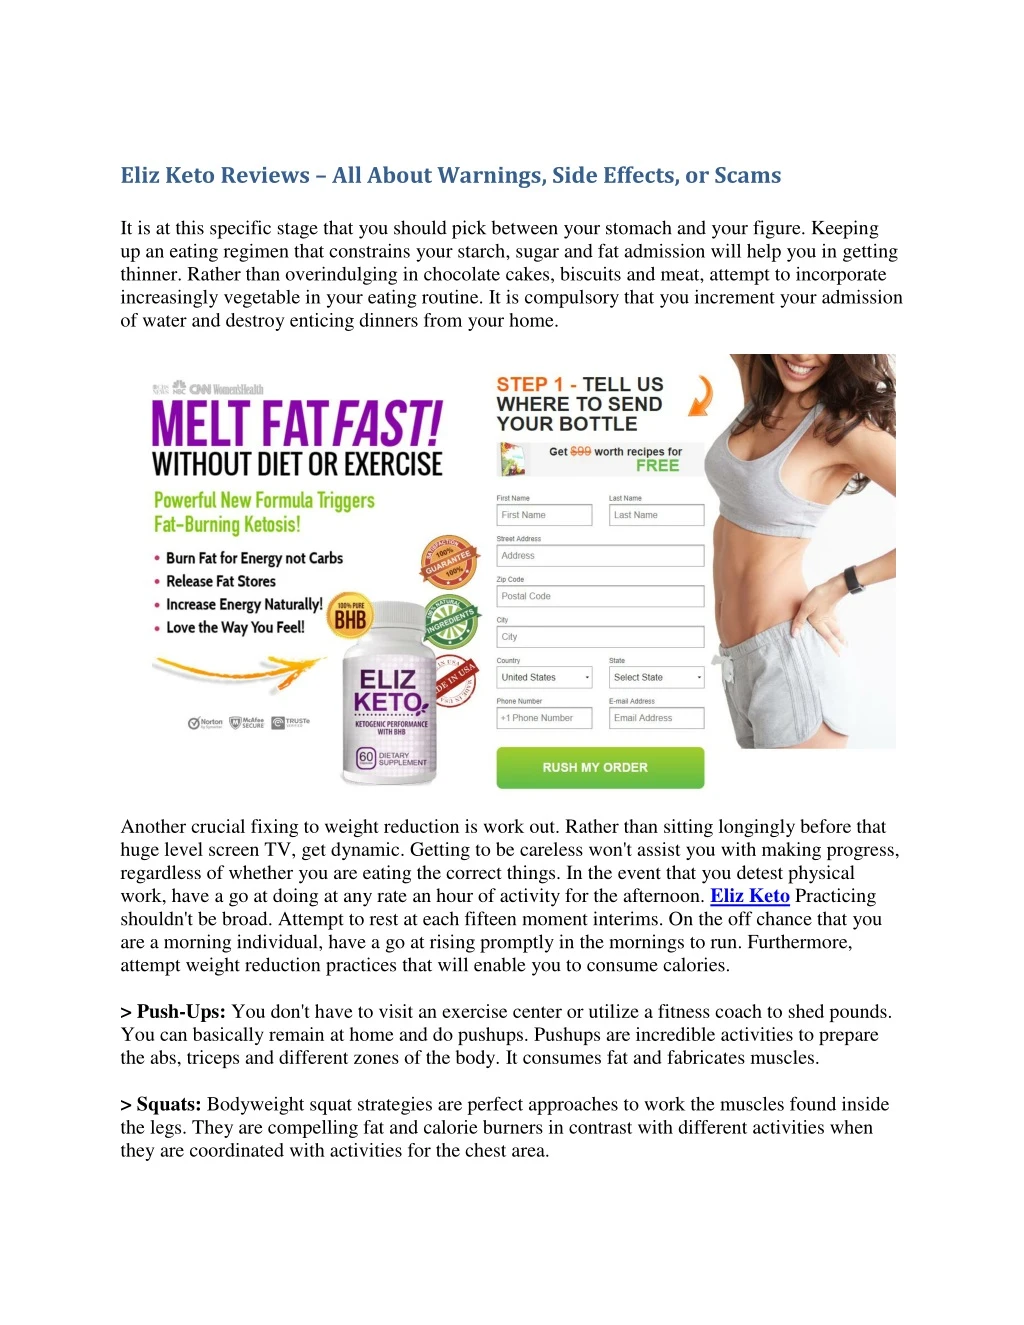 eliz keto reviews all about warnings side effects